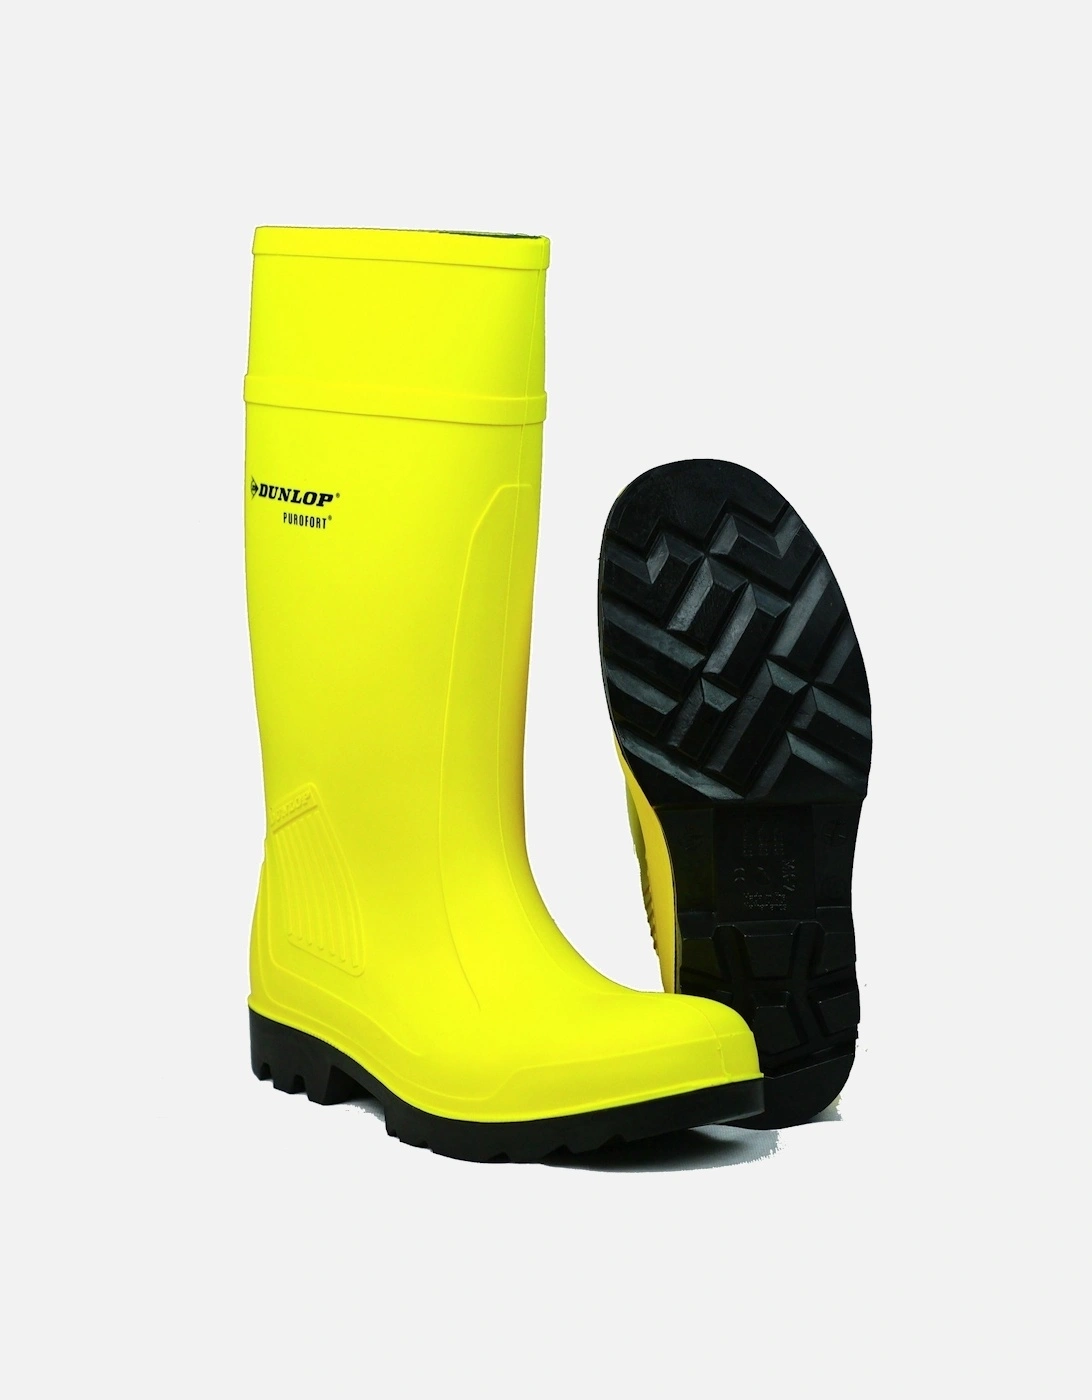 C462241 Purofort Full Safety Standard / Mens Boots / Safety Wellingtons